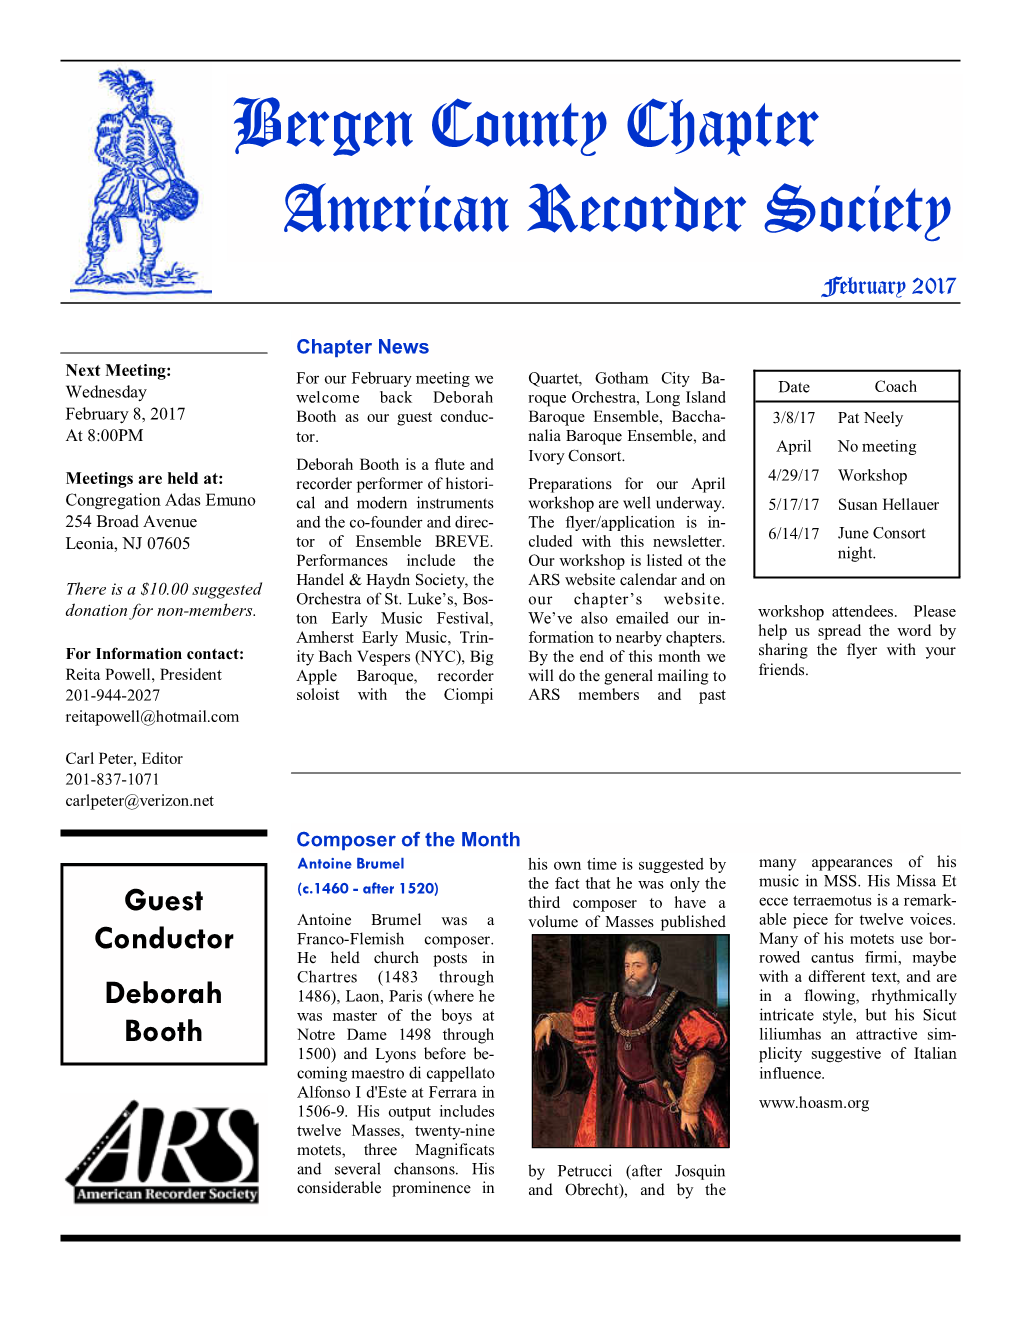 Bergen County Chapter American Recorder Society February 2017